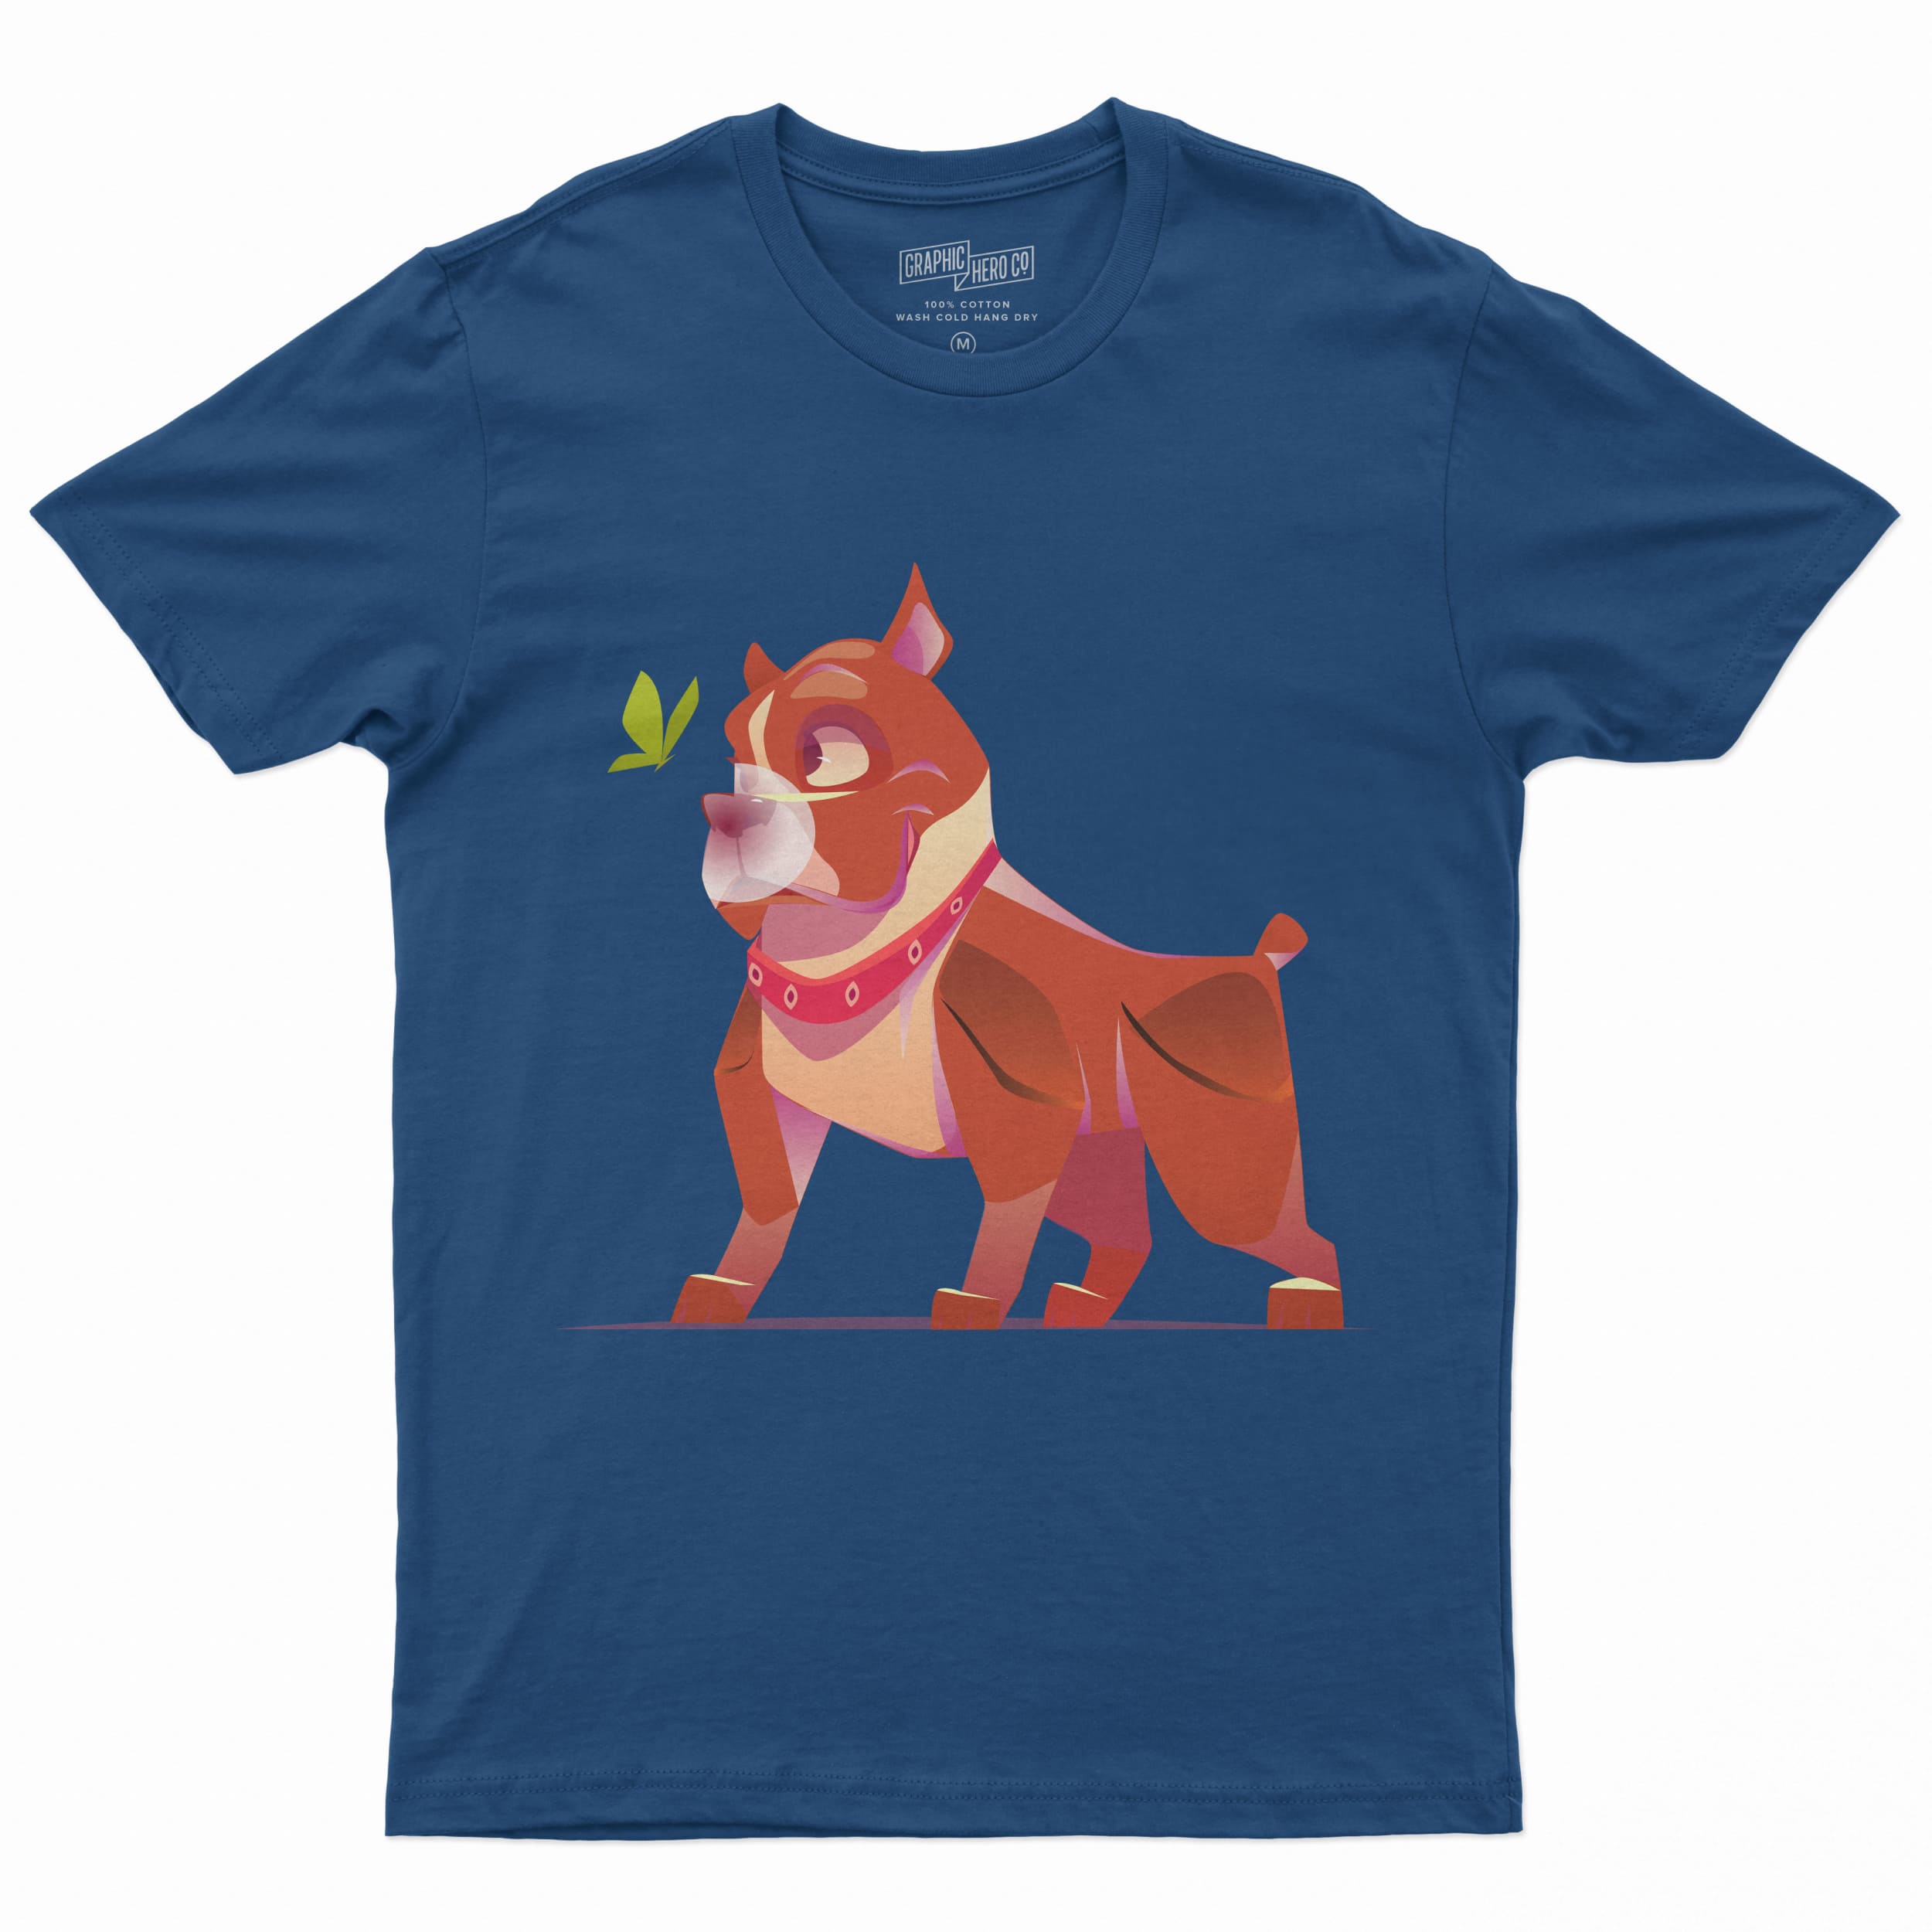 Dark blue t-shirt with a red pitbull with butterfly on a white background.